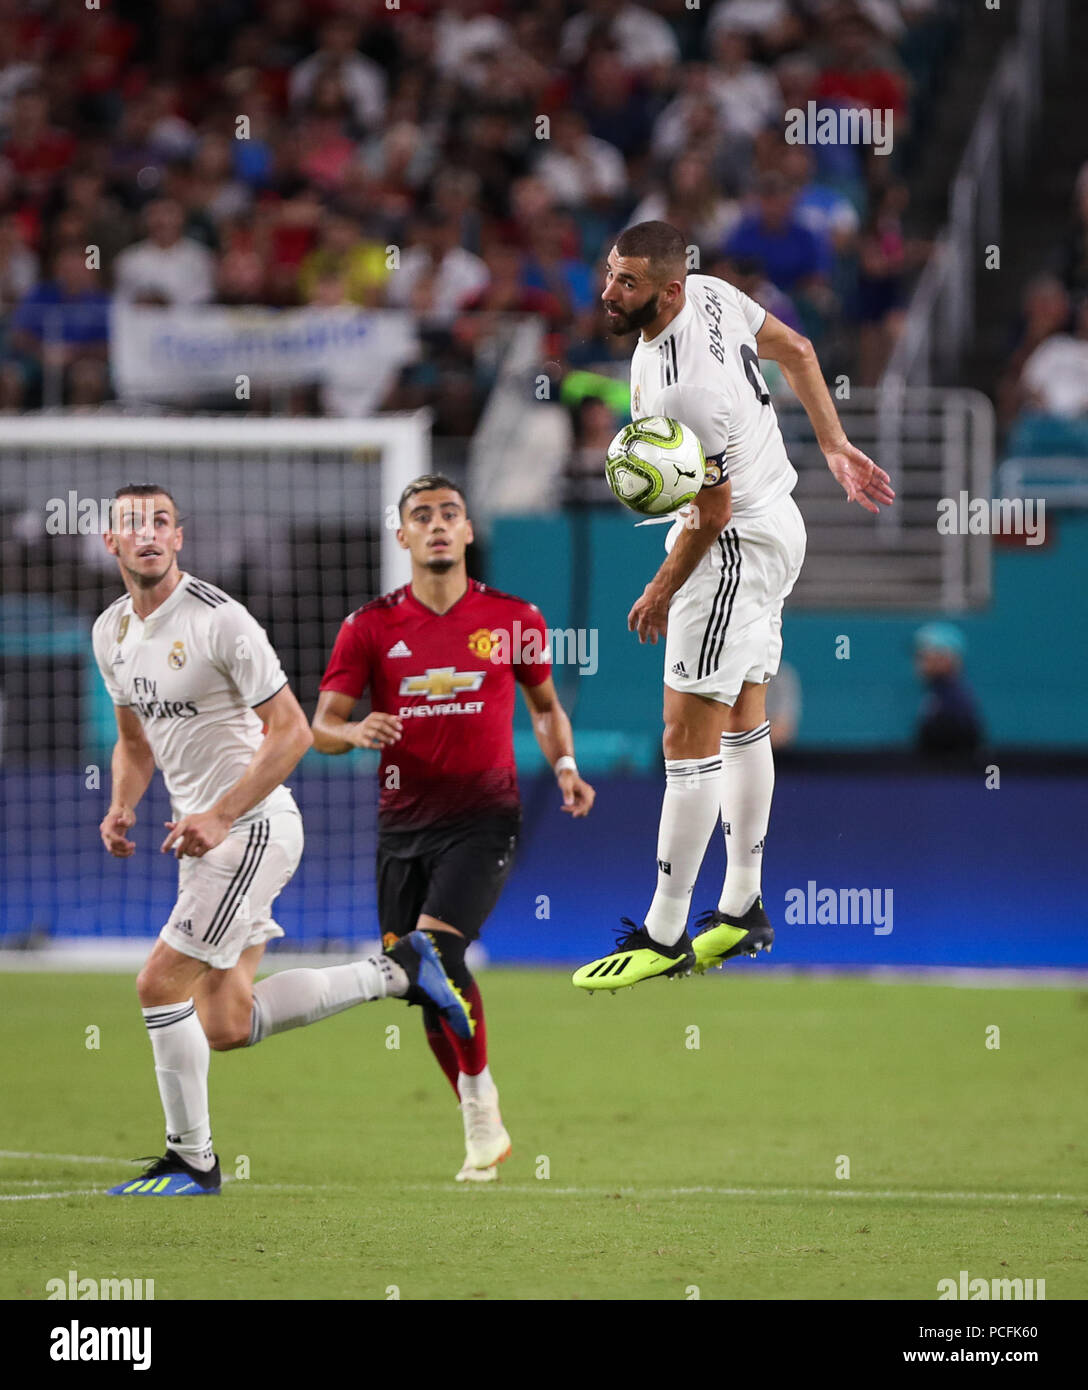 Miami Gardens, Florida, USA. 31st July, 2018. Real Madrid C.F. forward Karim Mostafa Benzema (9) leaps to pass the ball with a header, as Real Madrid C.F. forward Gareth Bale (11) (left) and Manchester United F.C. midfielder Andreas Pereira (15) (center) follow the action, during an International Champions Cup match between Real Madrid C.F. and Manchester United F.C. at the Hard Rock Stadium in Miami Gardens, Florida. Manchester United F.C. won the game 2-1. Credit: Mario Houben/ZUMA Wire/Alamy Live News Stock Photo